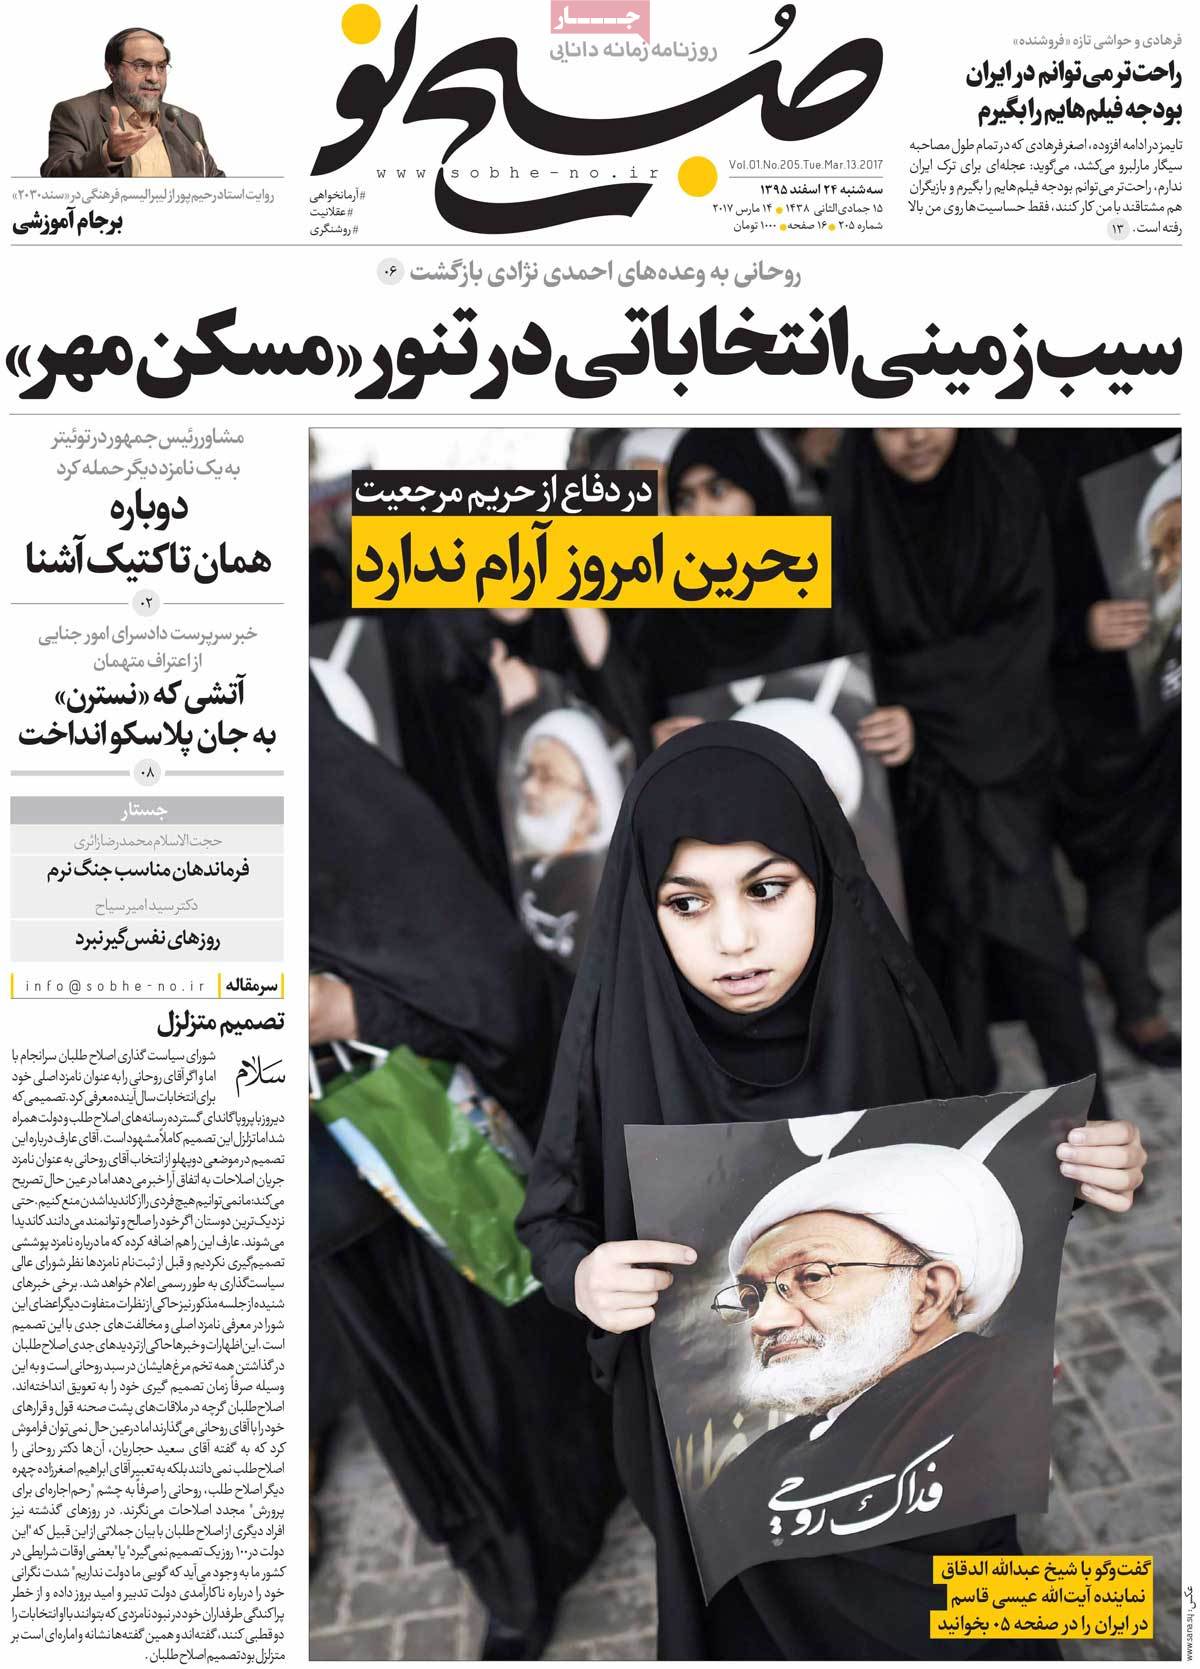 iranian newspaper front pages on march 14 sobhe no